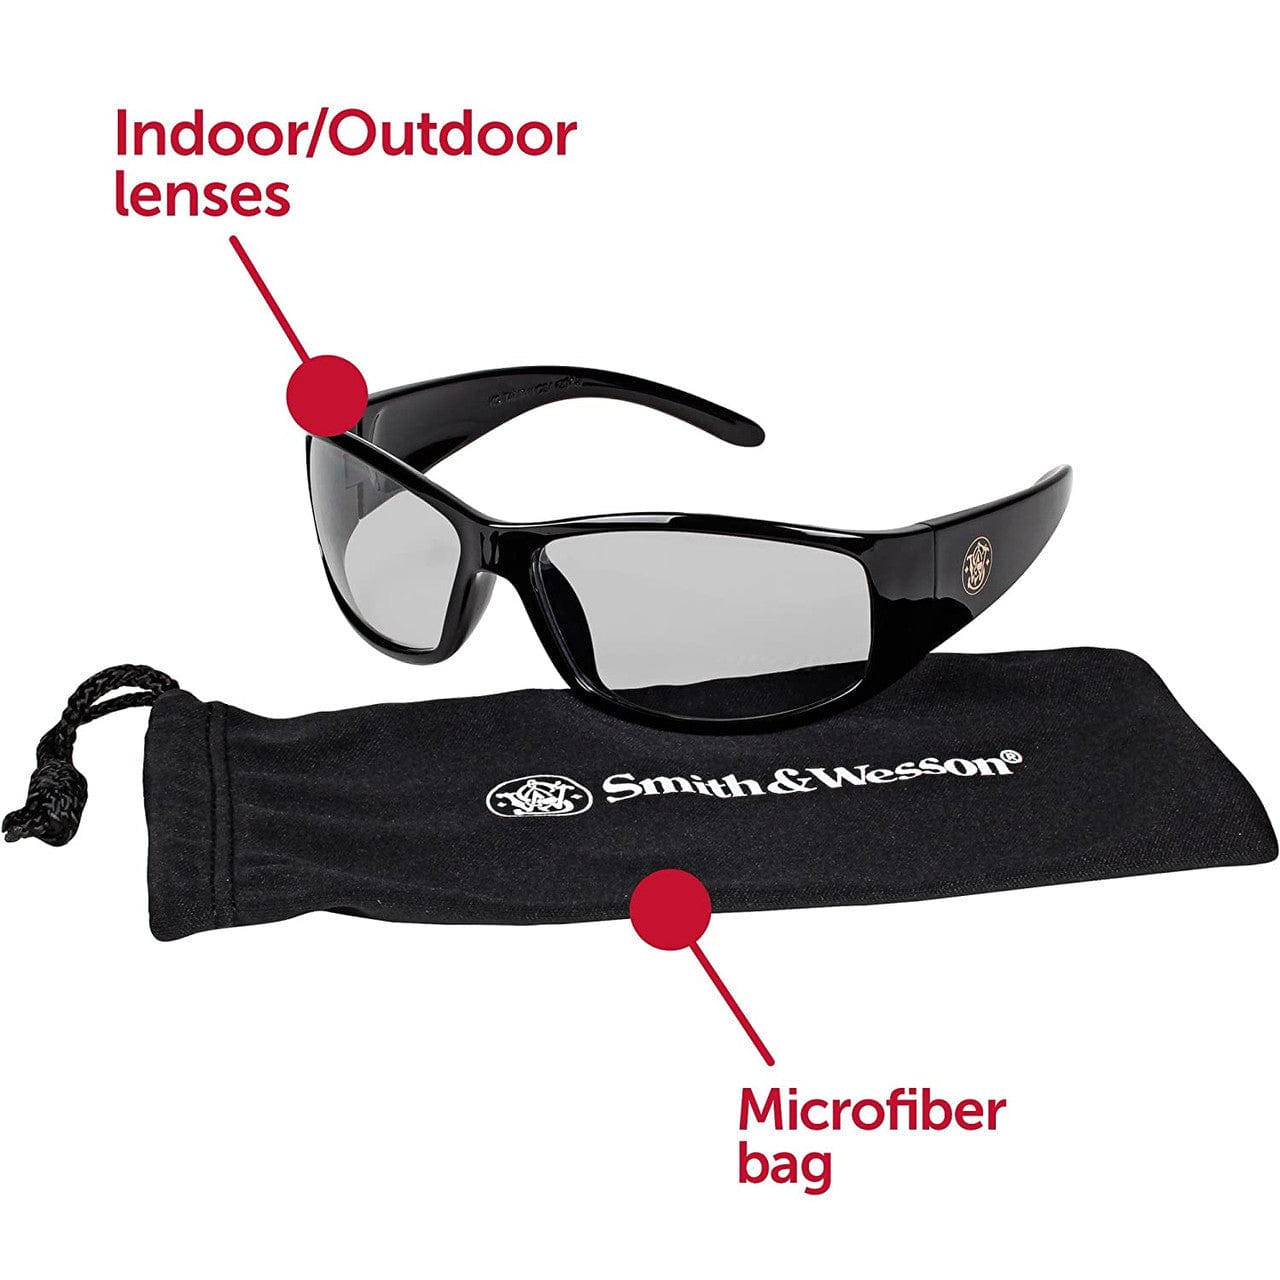 Smith & Wesson Elite Safety Glasses with Indoor/Outdoor Lens 21306 Key Features